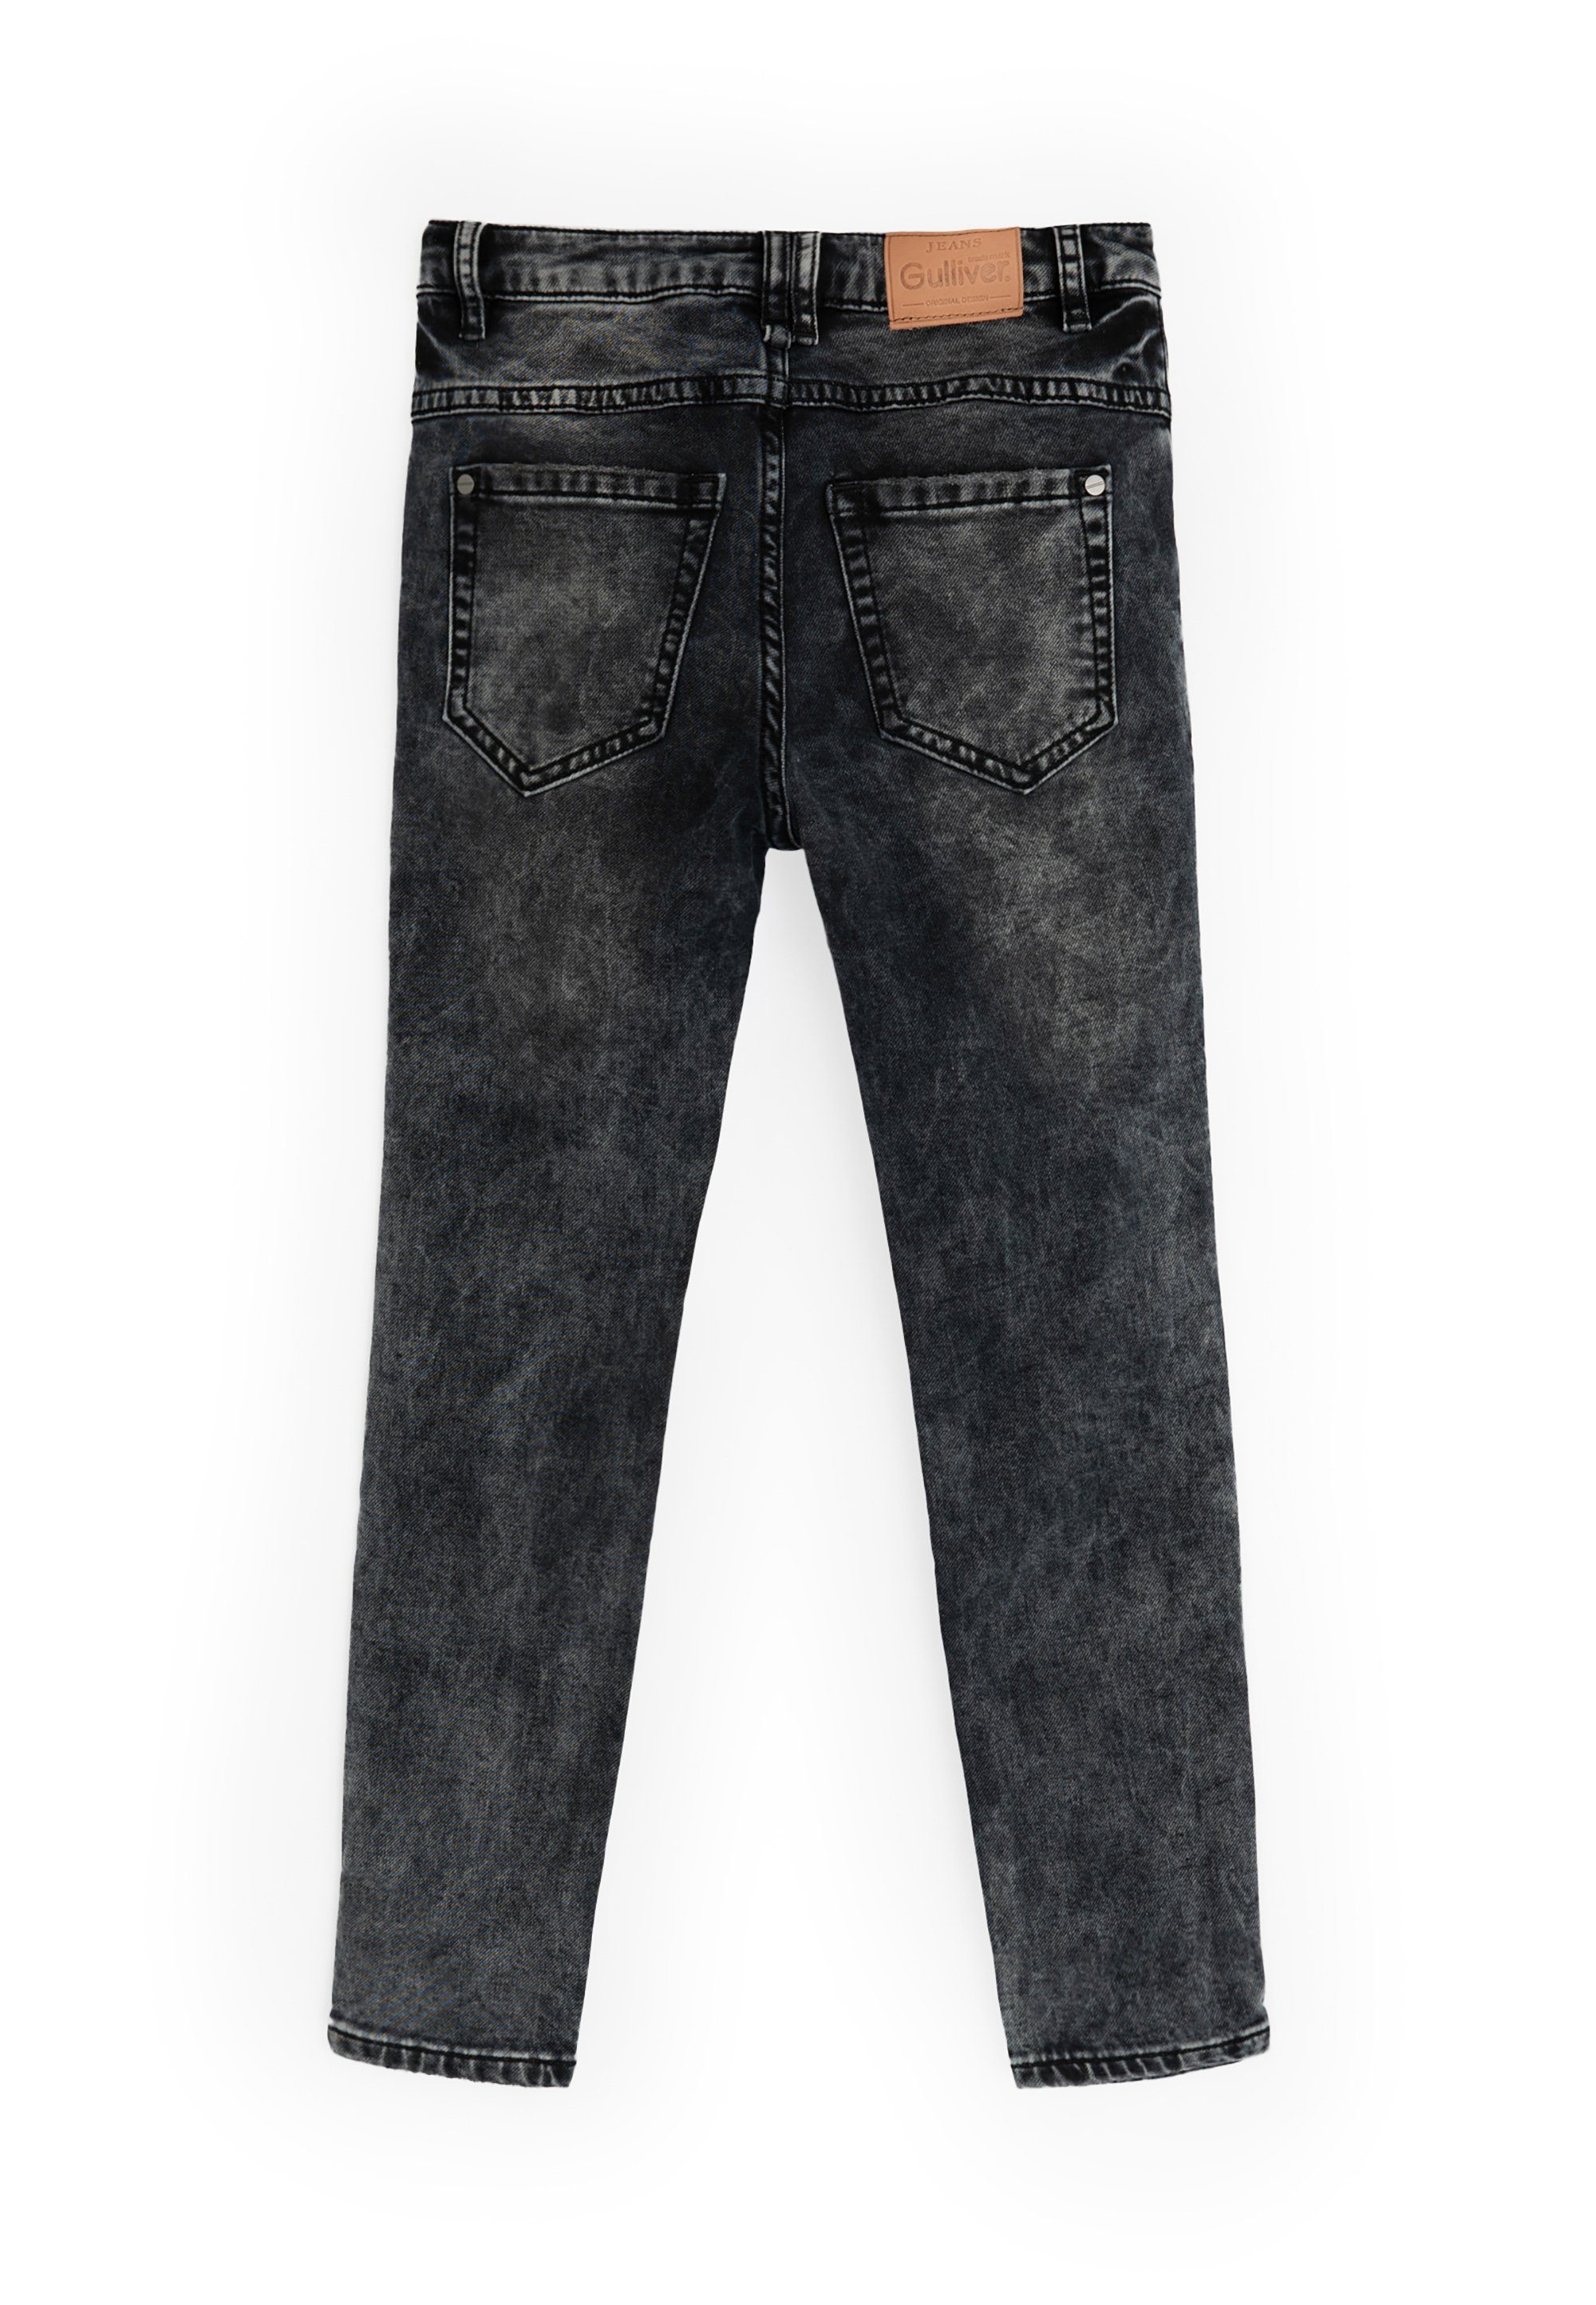 Used-Waschung Gulliver Slim-fit-Jeans mit